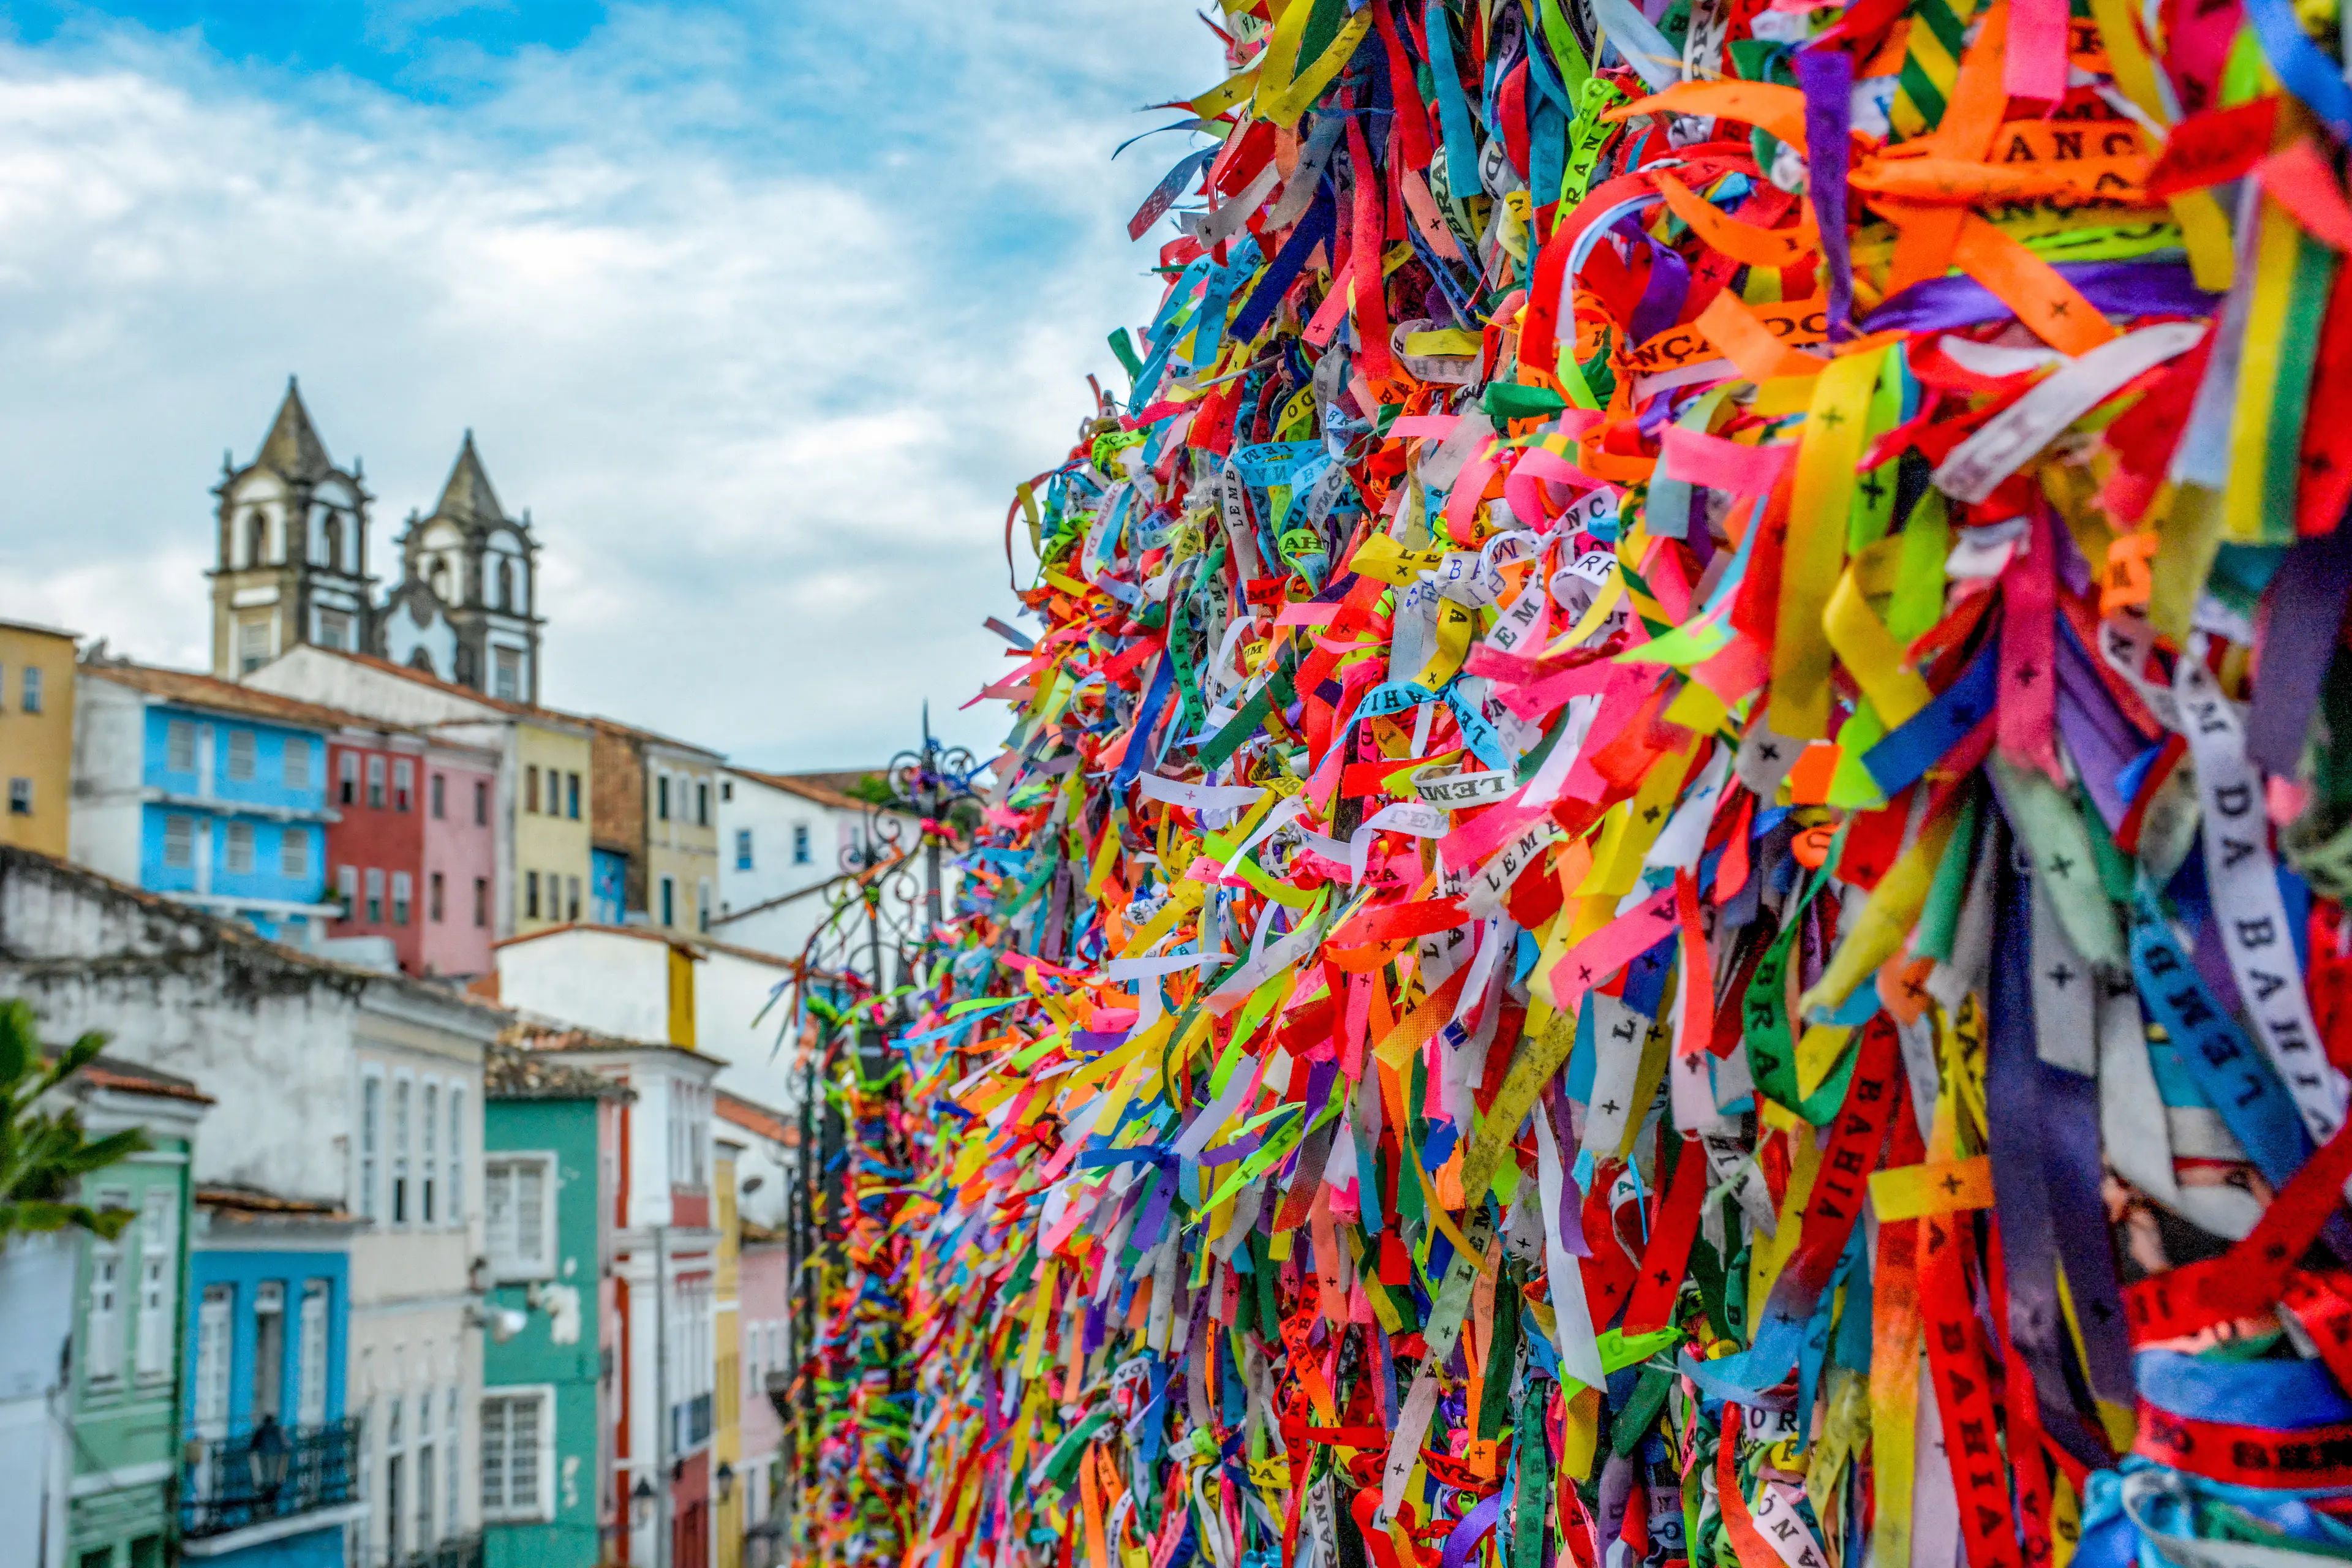 Explore Salvador, Brazil in Just 1 Day